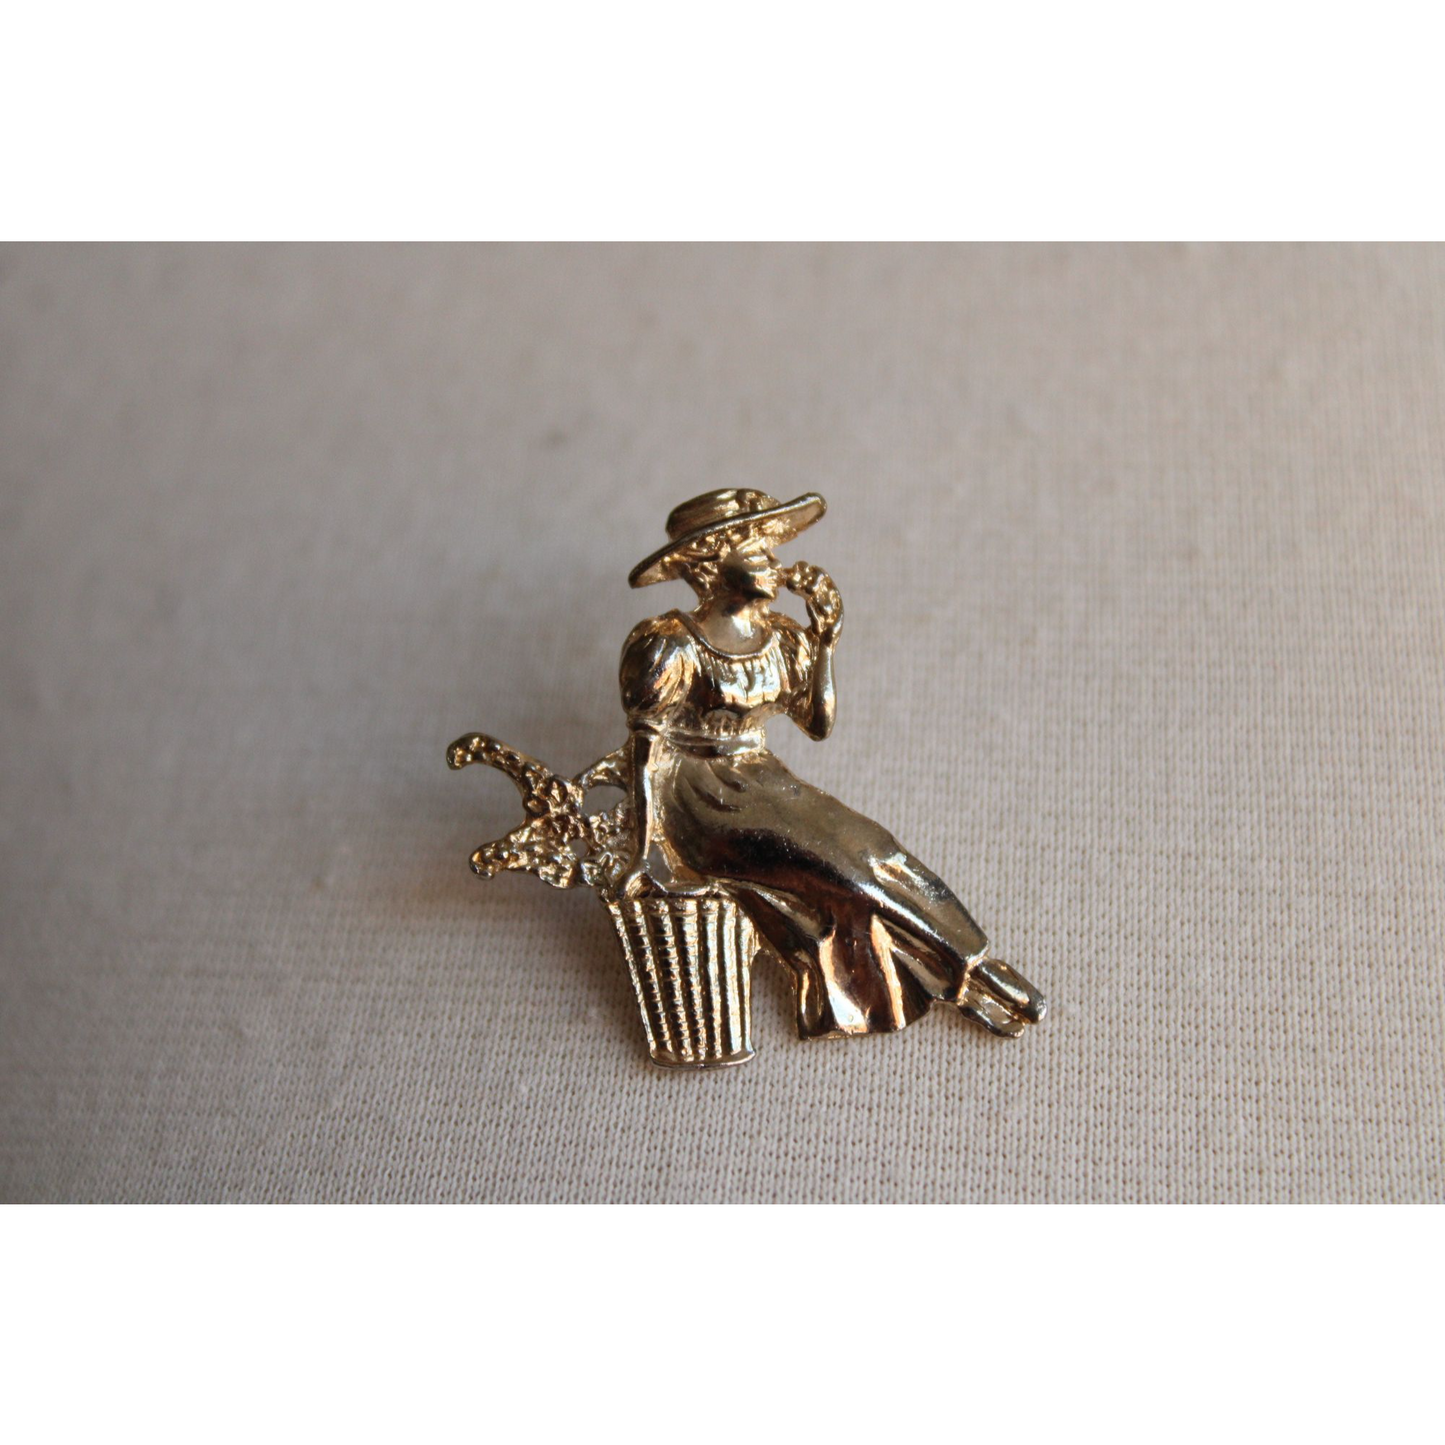 Vintage Brooch,  Woman in Hat with Flowers Gold Tone Clothing Pin